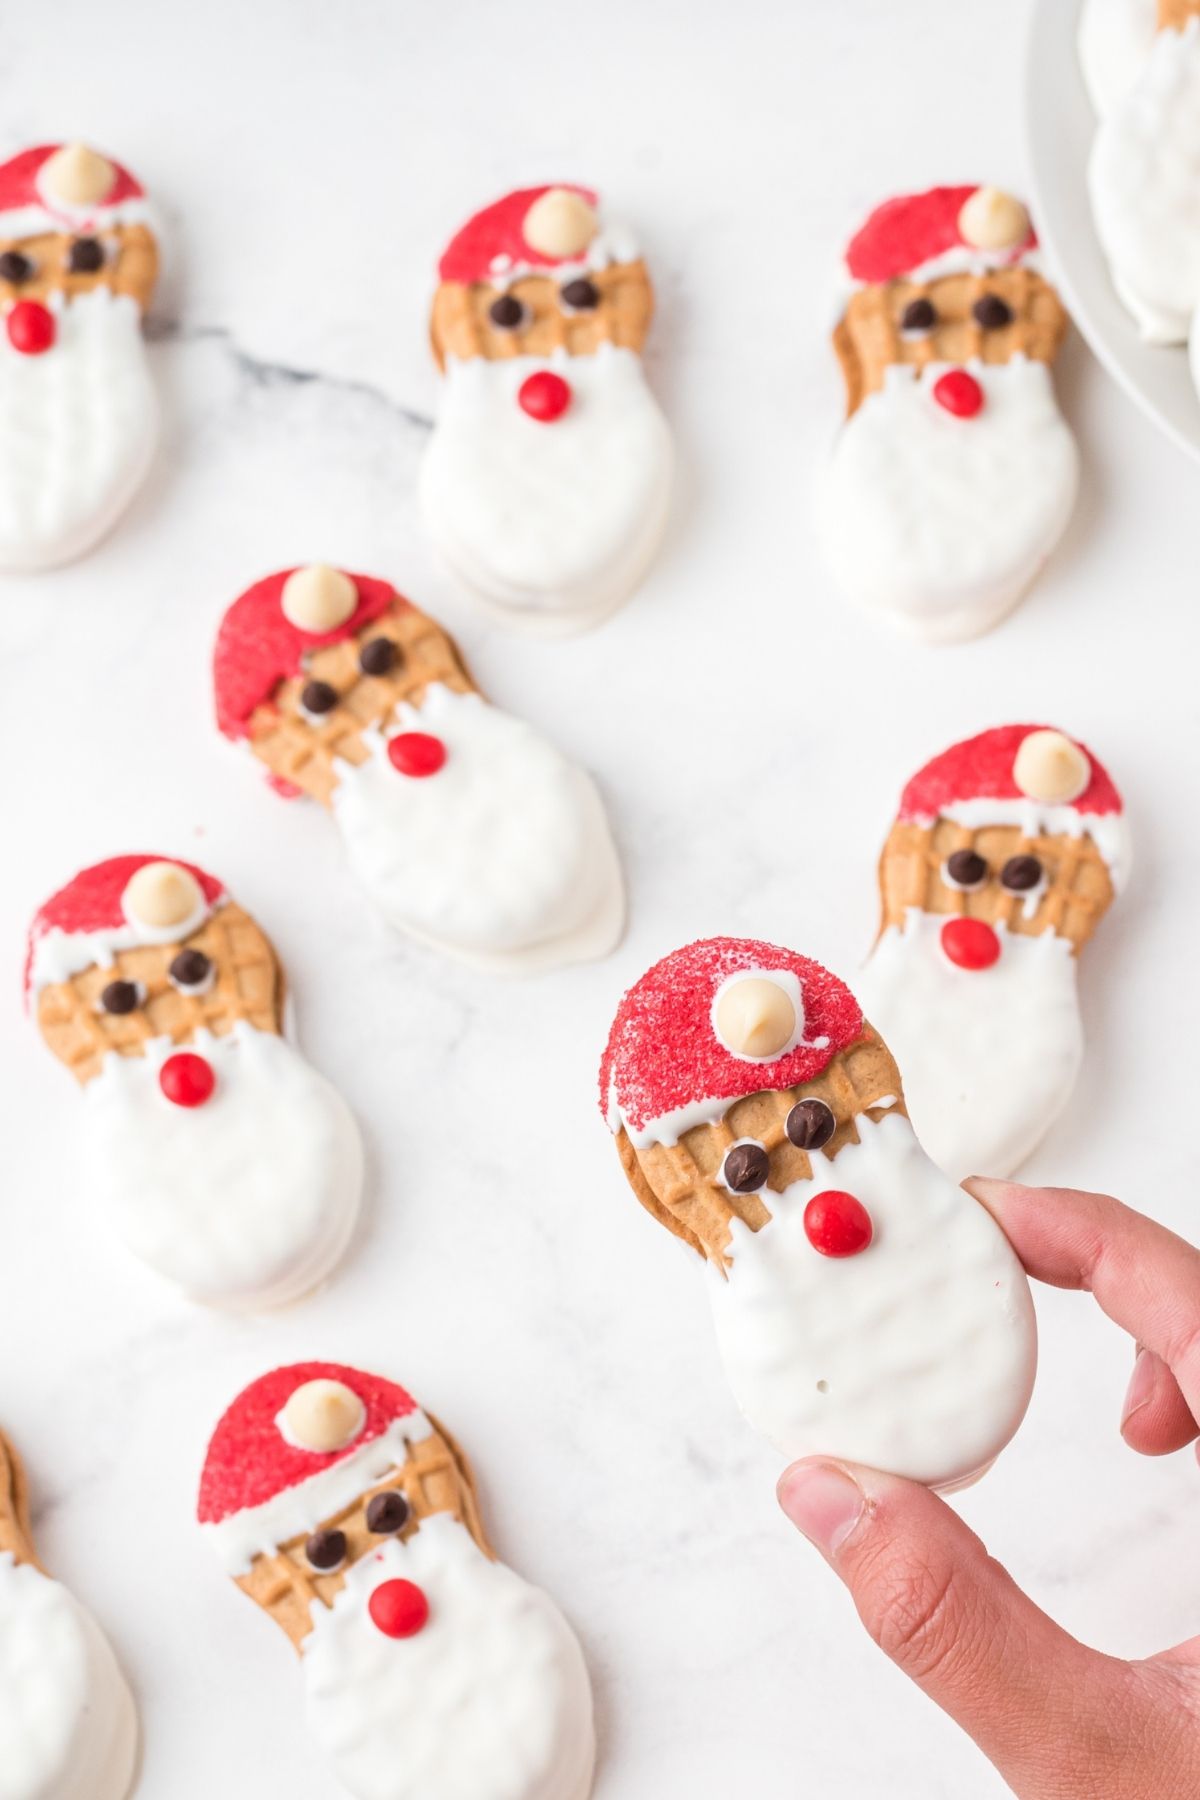 Nutter butter cookies with red sprinkles for a hat and a white chocolate beard